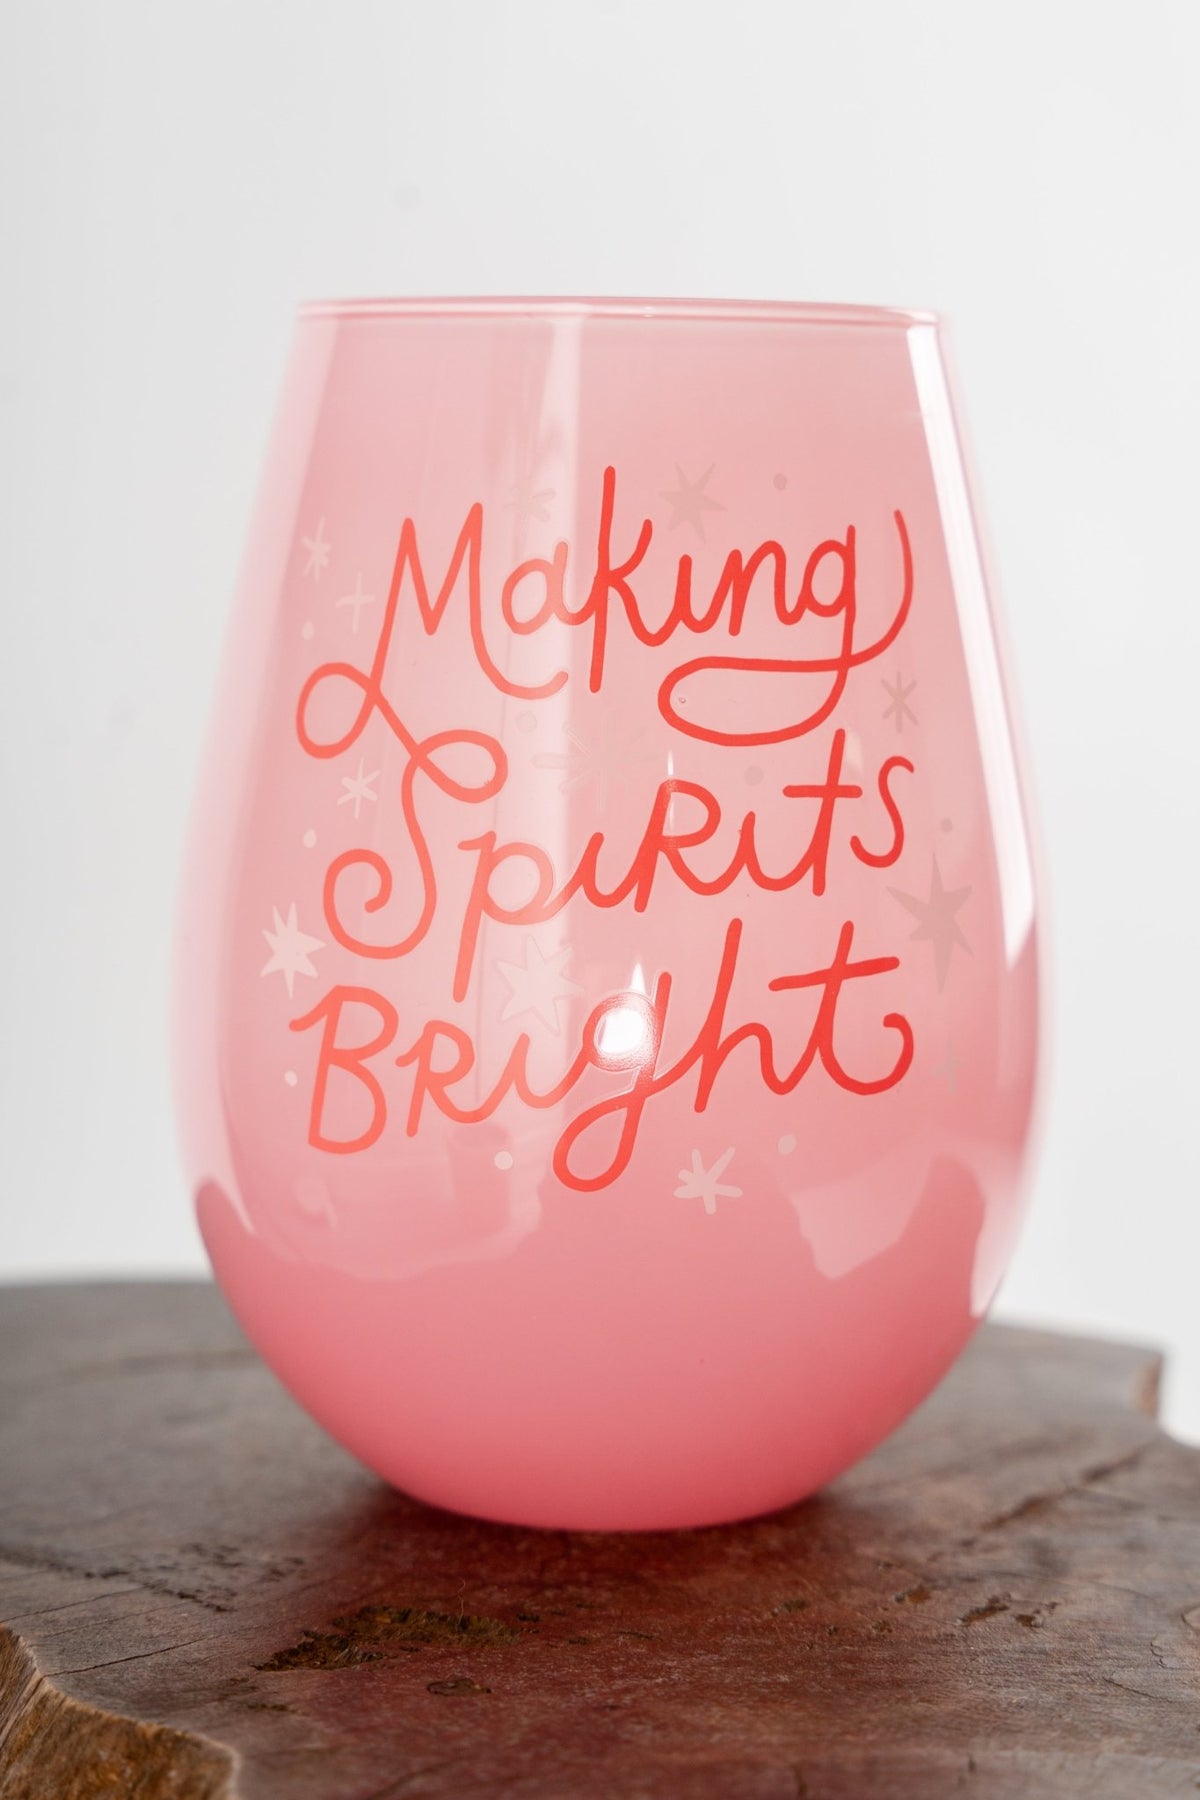 Making spirits bright 30 ounce stemless wine glass pink - Trendy Holiday Apparel at Lush Fashion Lounge Boutique in Oklahoma City